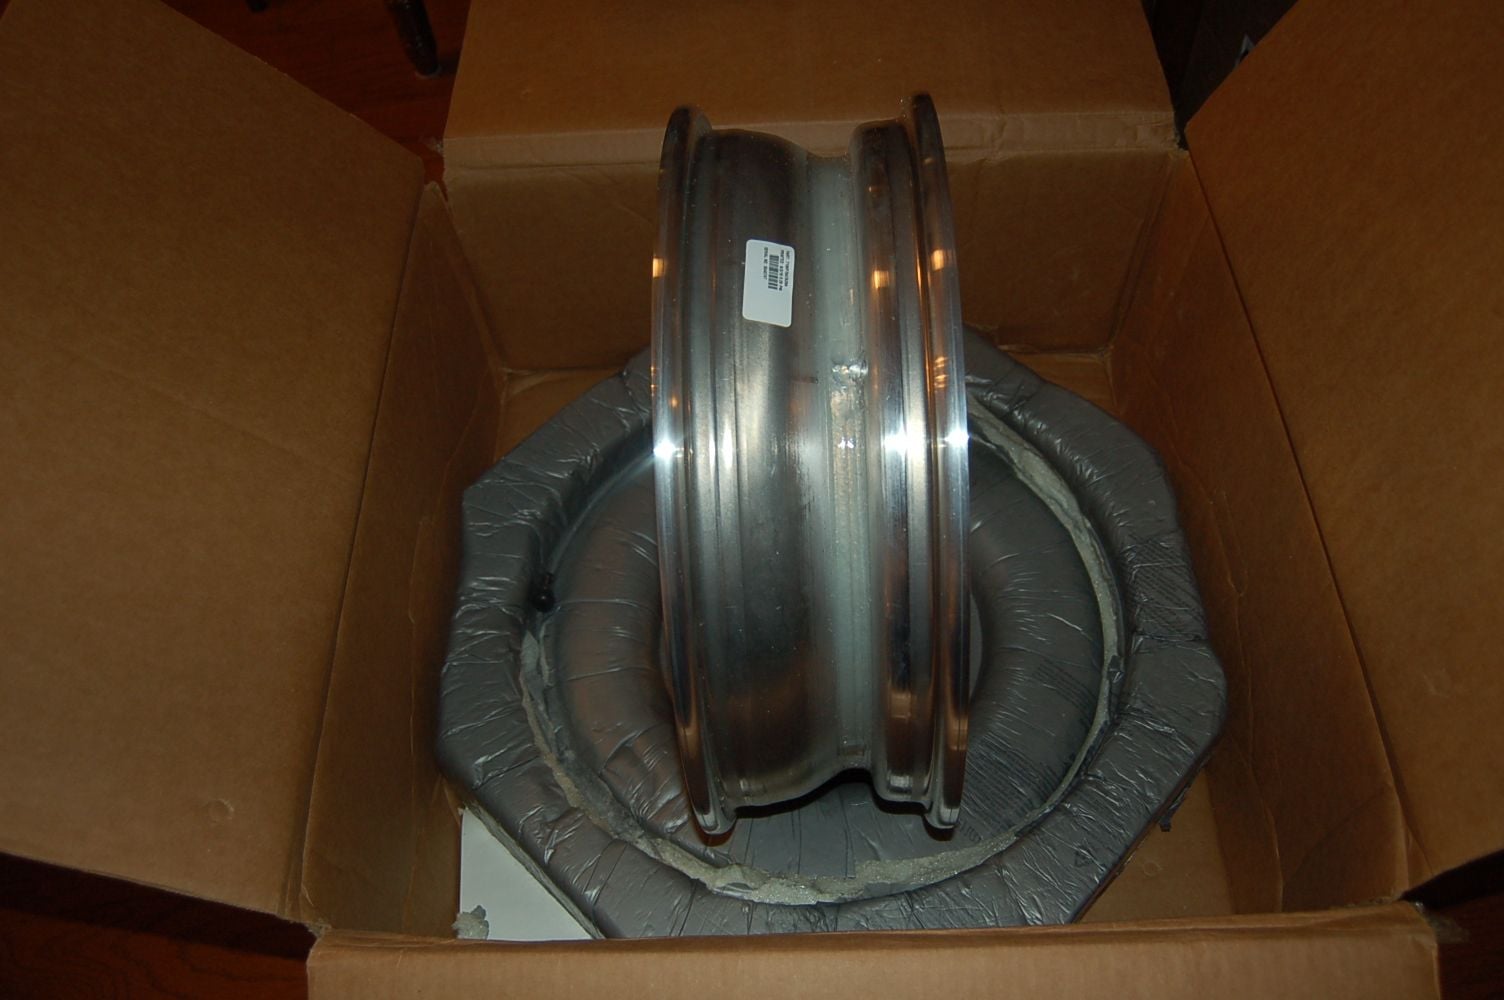  - Pair of 17" x 4.5"  weld  rt-s  s71  polished - 4.75"  bolt pattern  /  medium pad - Carlinville, IL 62626, United States